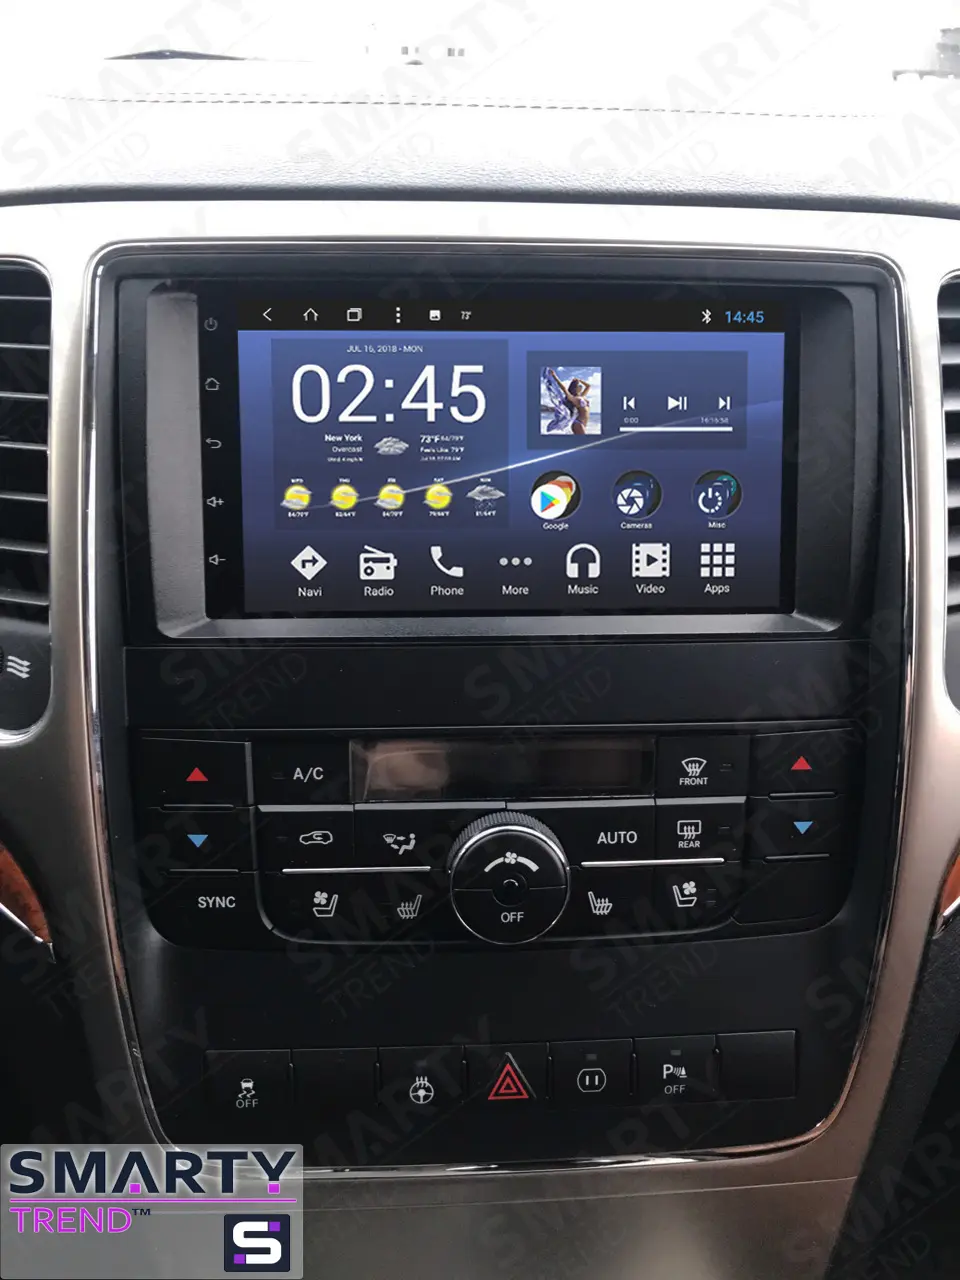 Jeep Grand Cherokee installed Android